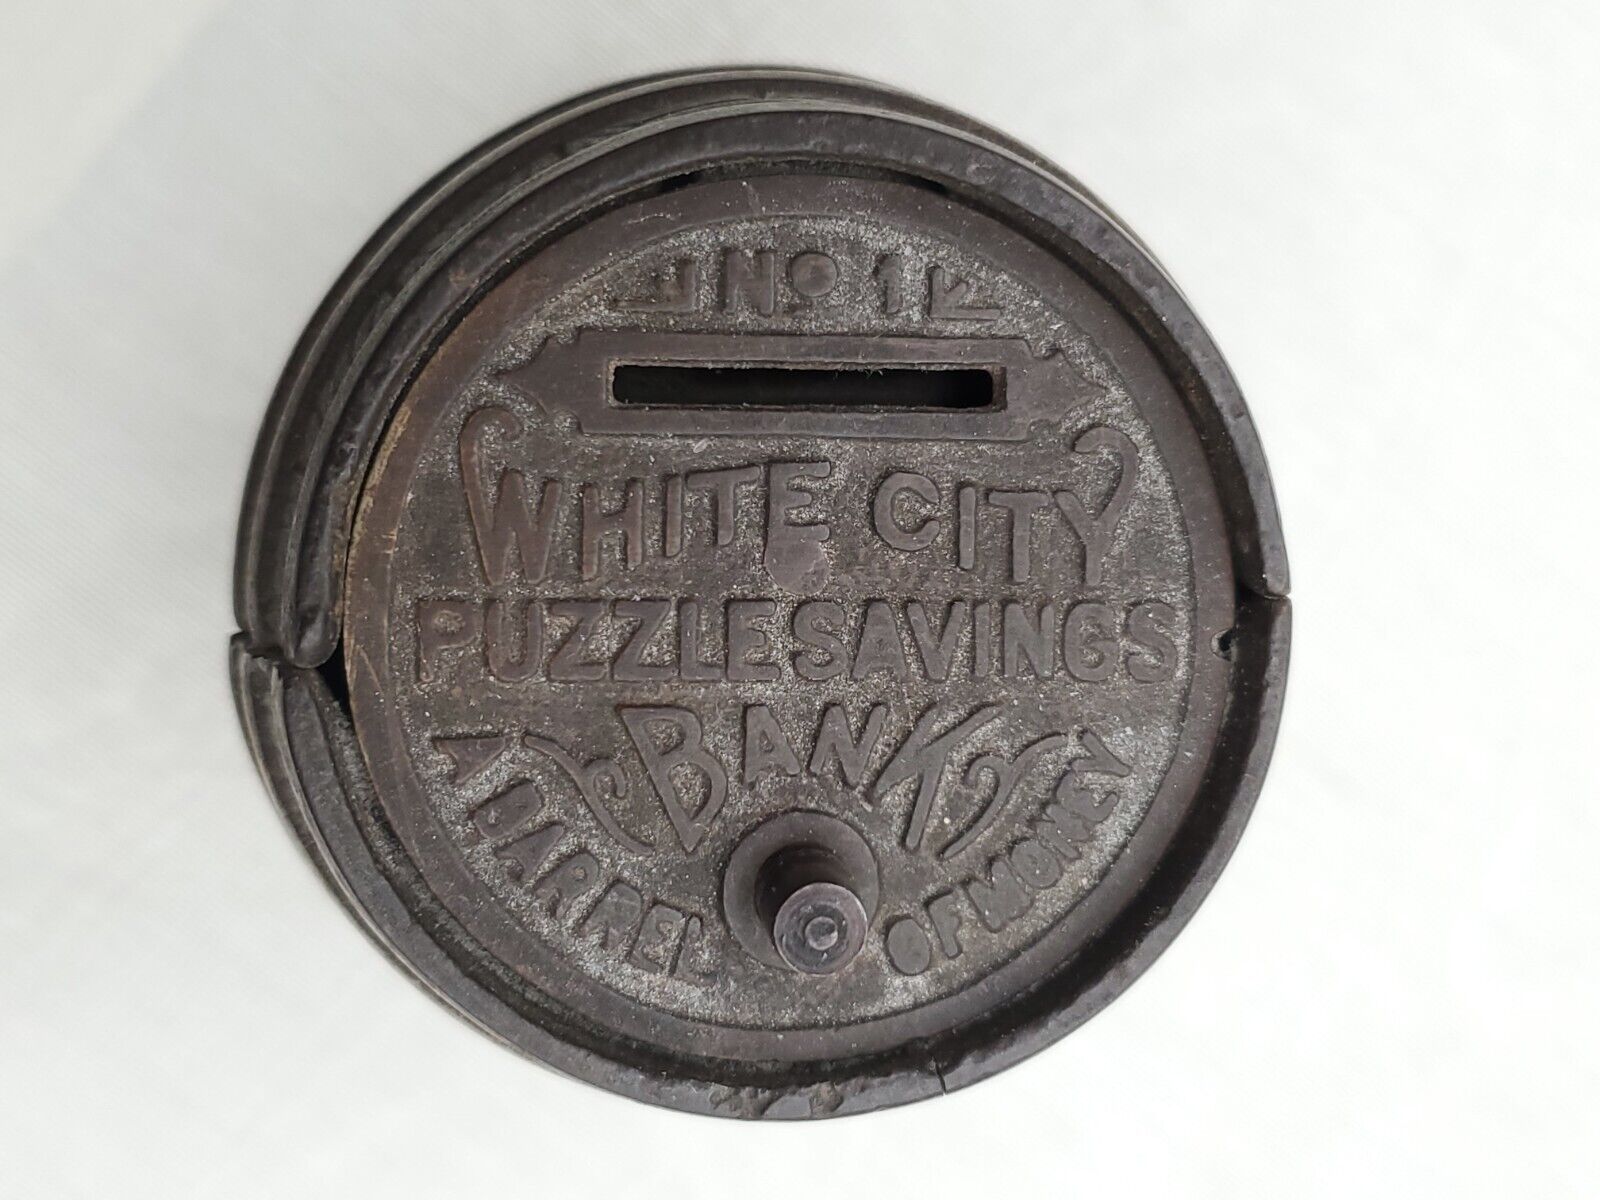 1894 ADVERTISING BANK #1 WHITE CITY PUZZLE SAVINGS CAST BARREL OF MONEY CHICAGO